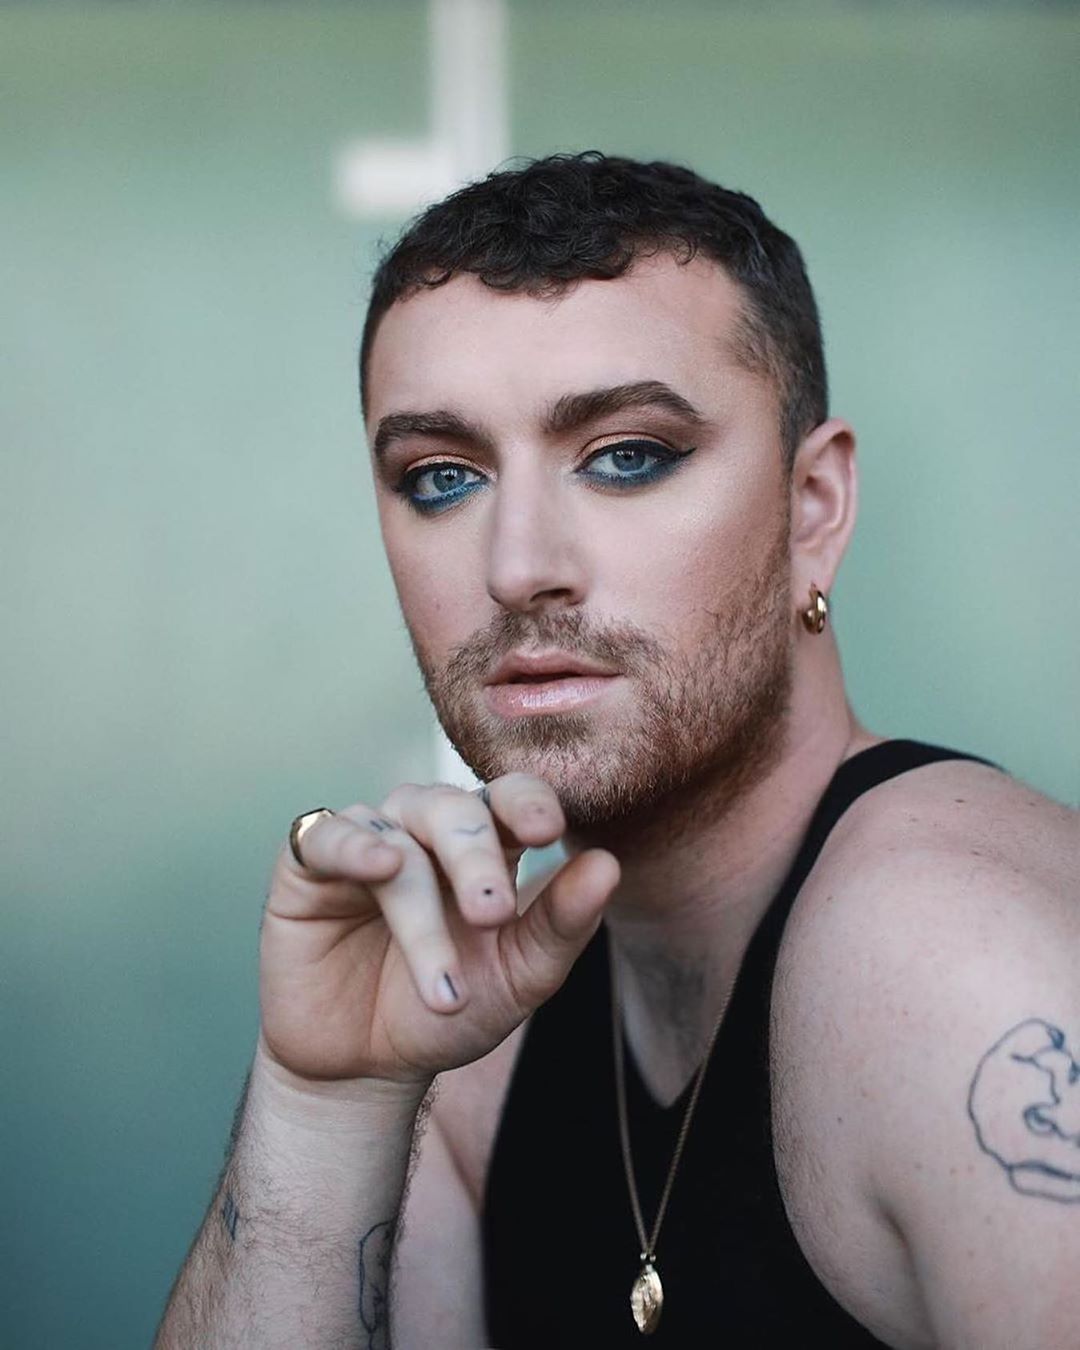 sam smith in the lonely hour album cover